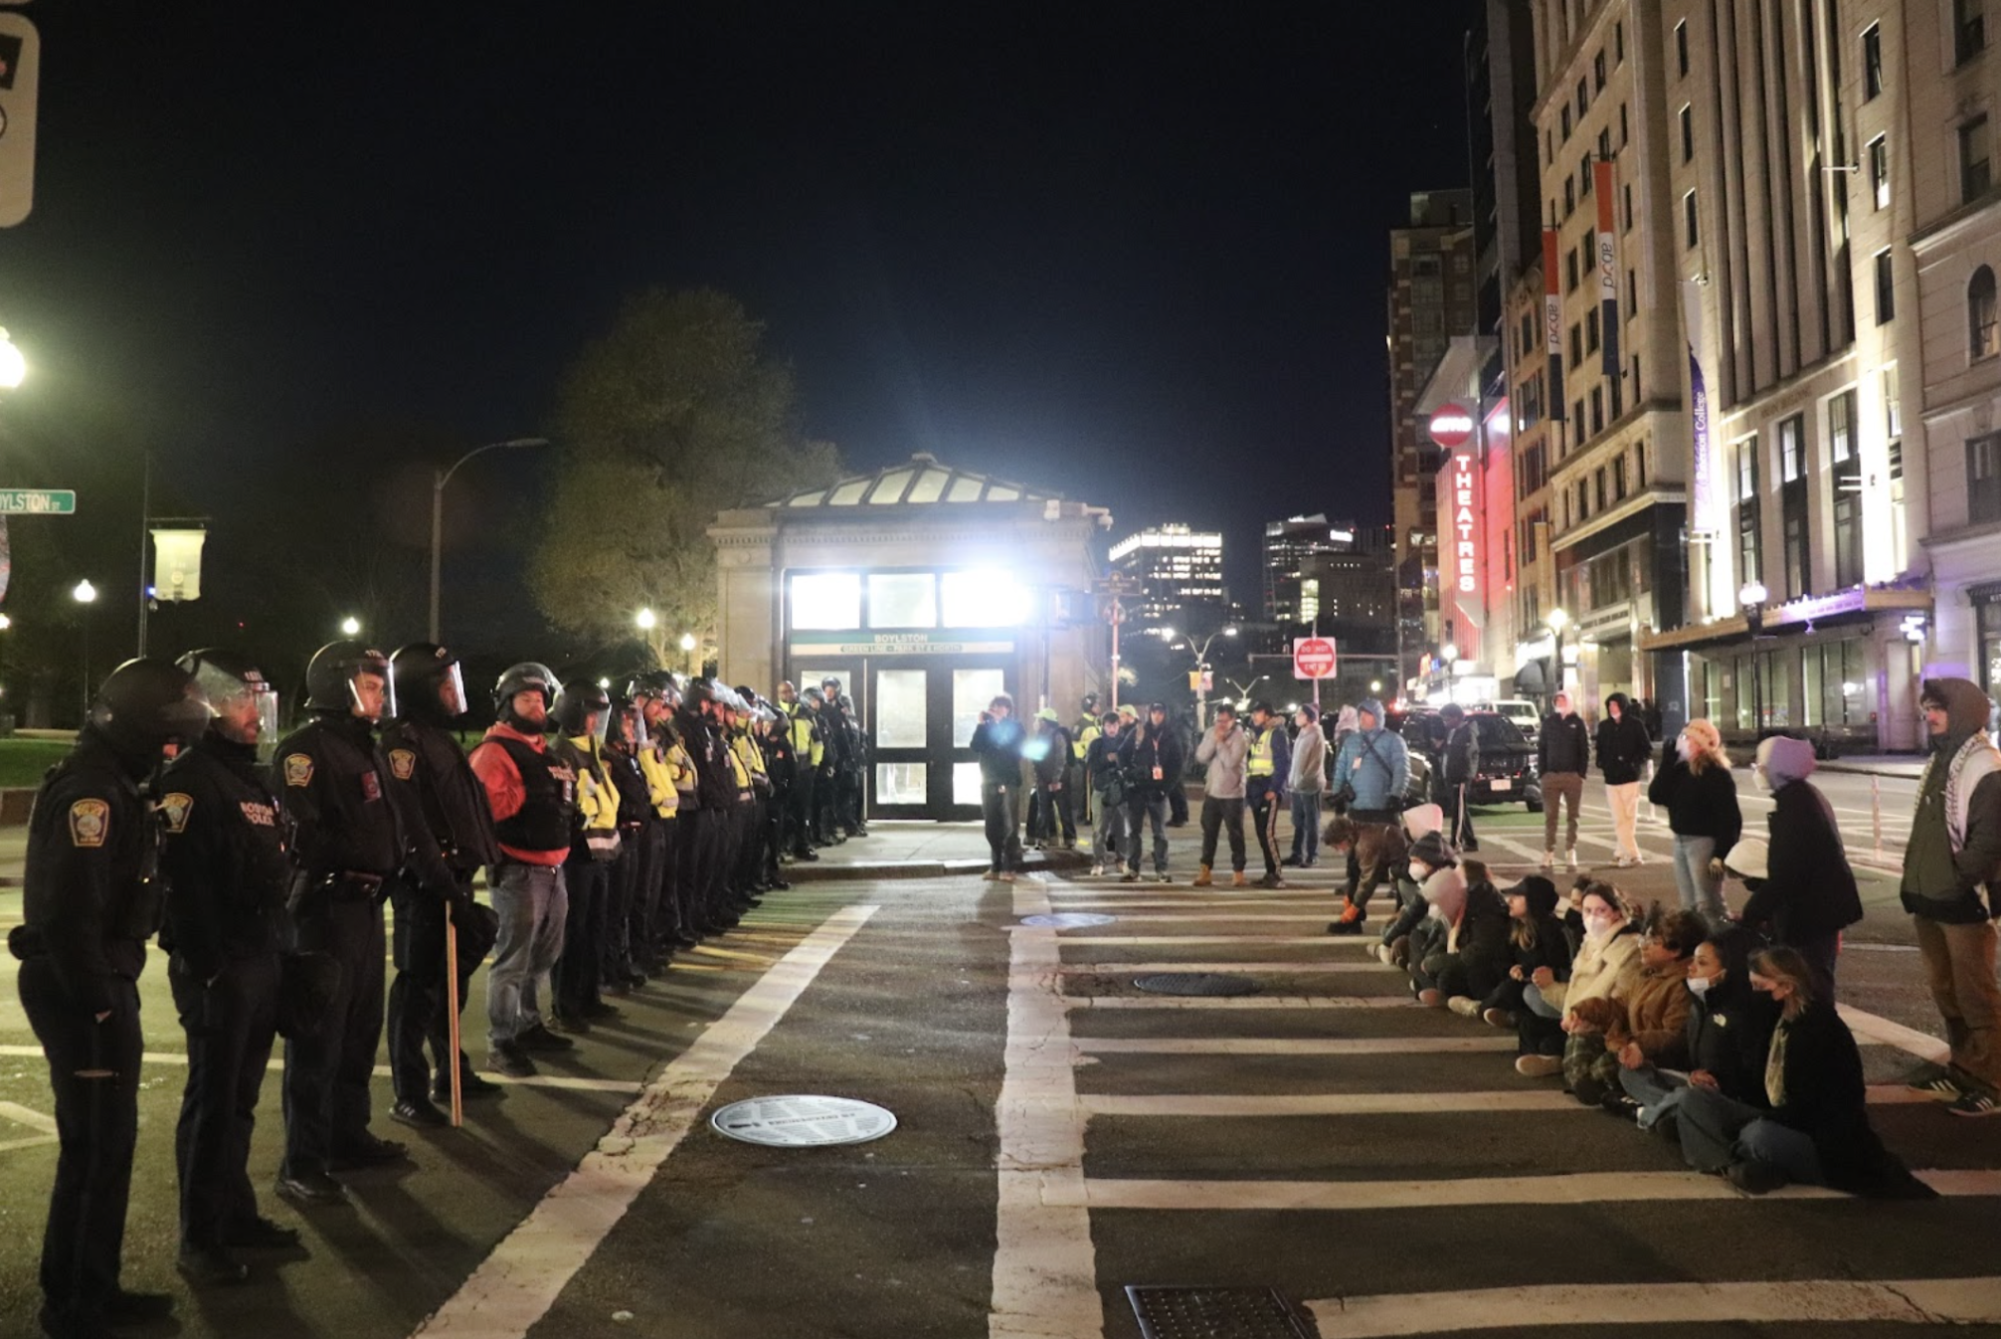 108+protesters+were+arrested+earlier+today+in+the+2+Boylston+Place+alley%2C+the+same+number+of+individuals+arrested+at+Columbia+University+that+Emerson+protesters+were+expressing+their+solidarity+for.+It+is+not+known+the+exact+number+of+Emerson+College+students+arrested%2C+but+officials+say+that+a+majority+of+the+protesters+were+arrested+for+disturbing+the+peace.